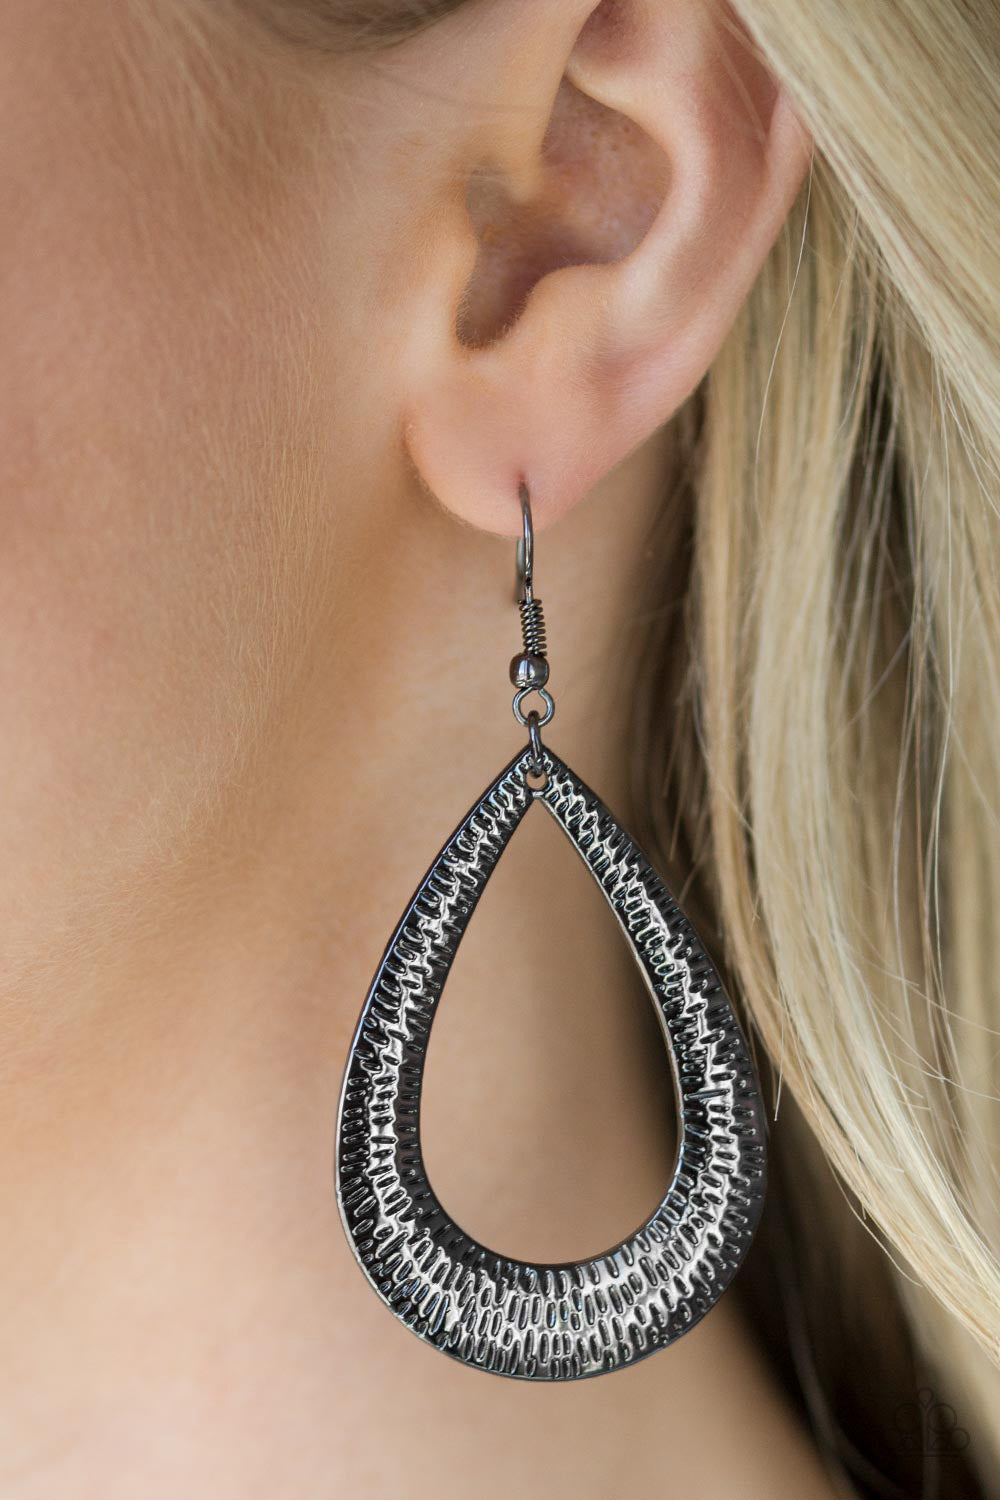 Straight Up Shimmer - black - Paparazzi earrings